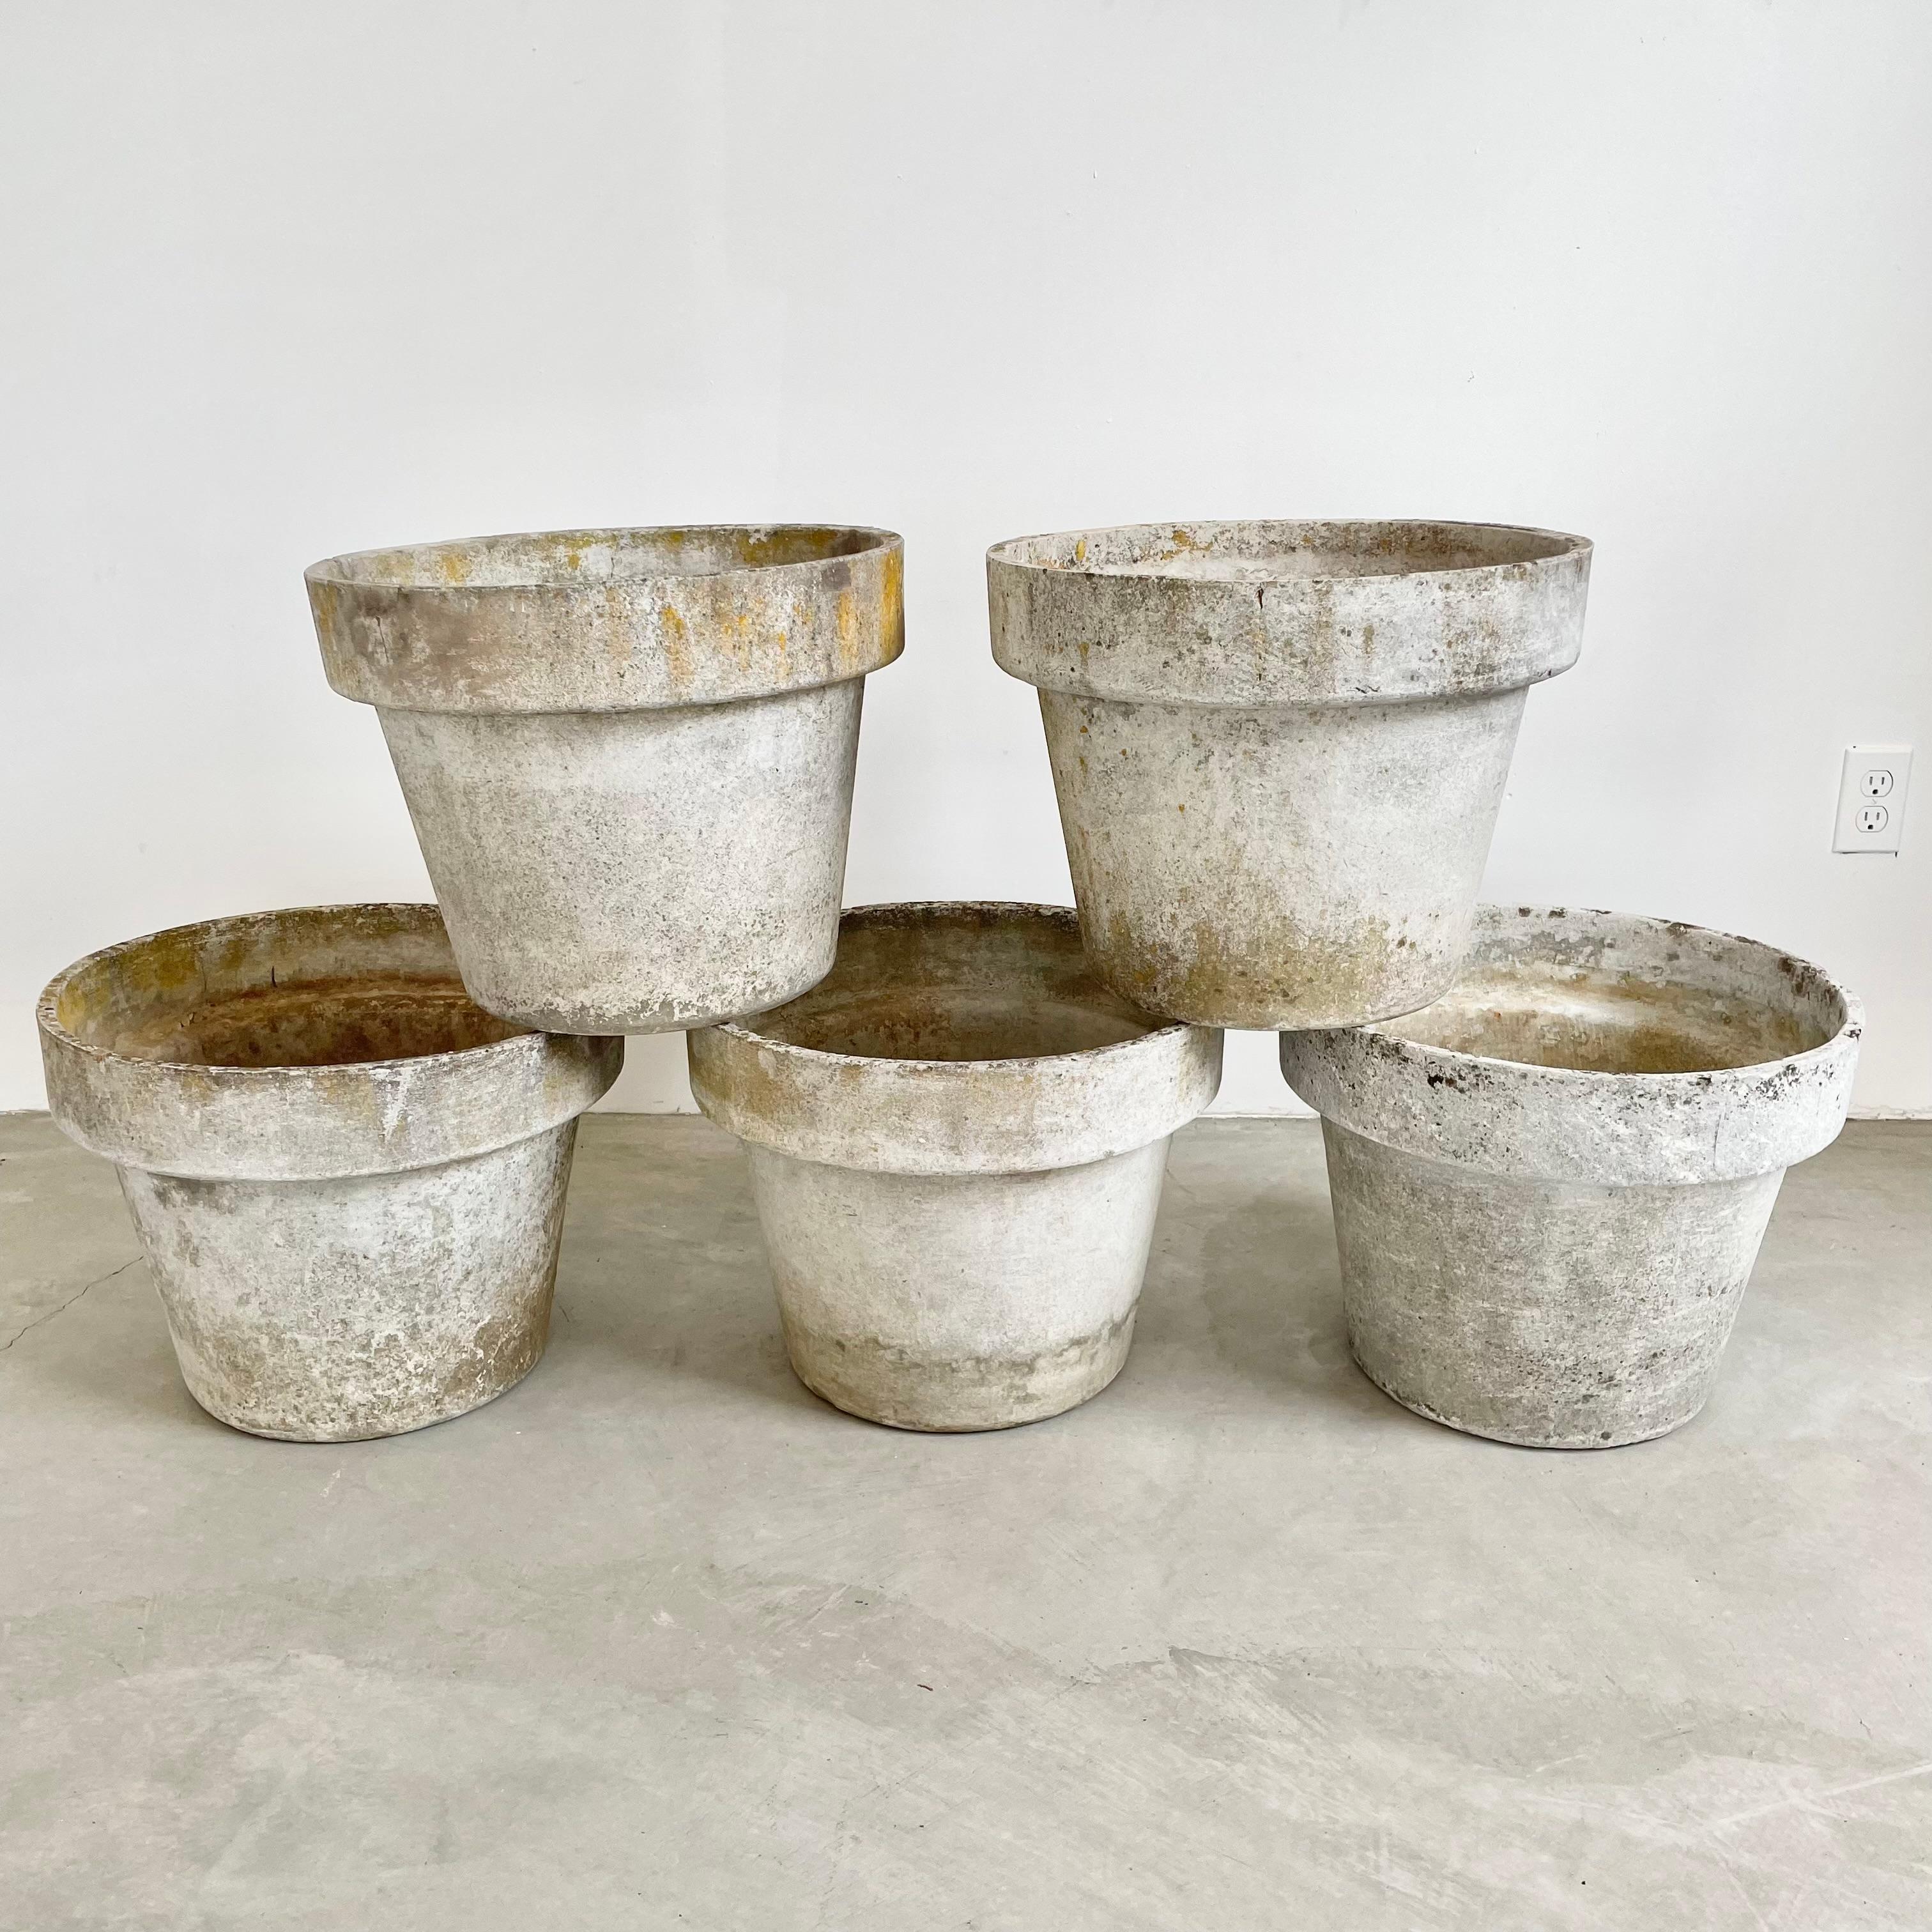 Perfect large concrete flower pots by Willy Guhl. Made in Switzerland in the 1960s. Great vintage condition. Classic flower pot design with large basin and banded lip at the top. Each planter with a slightly different patina. 5 available. Priced